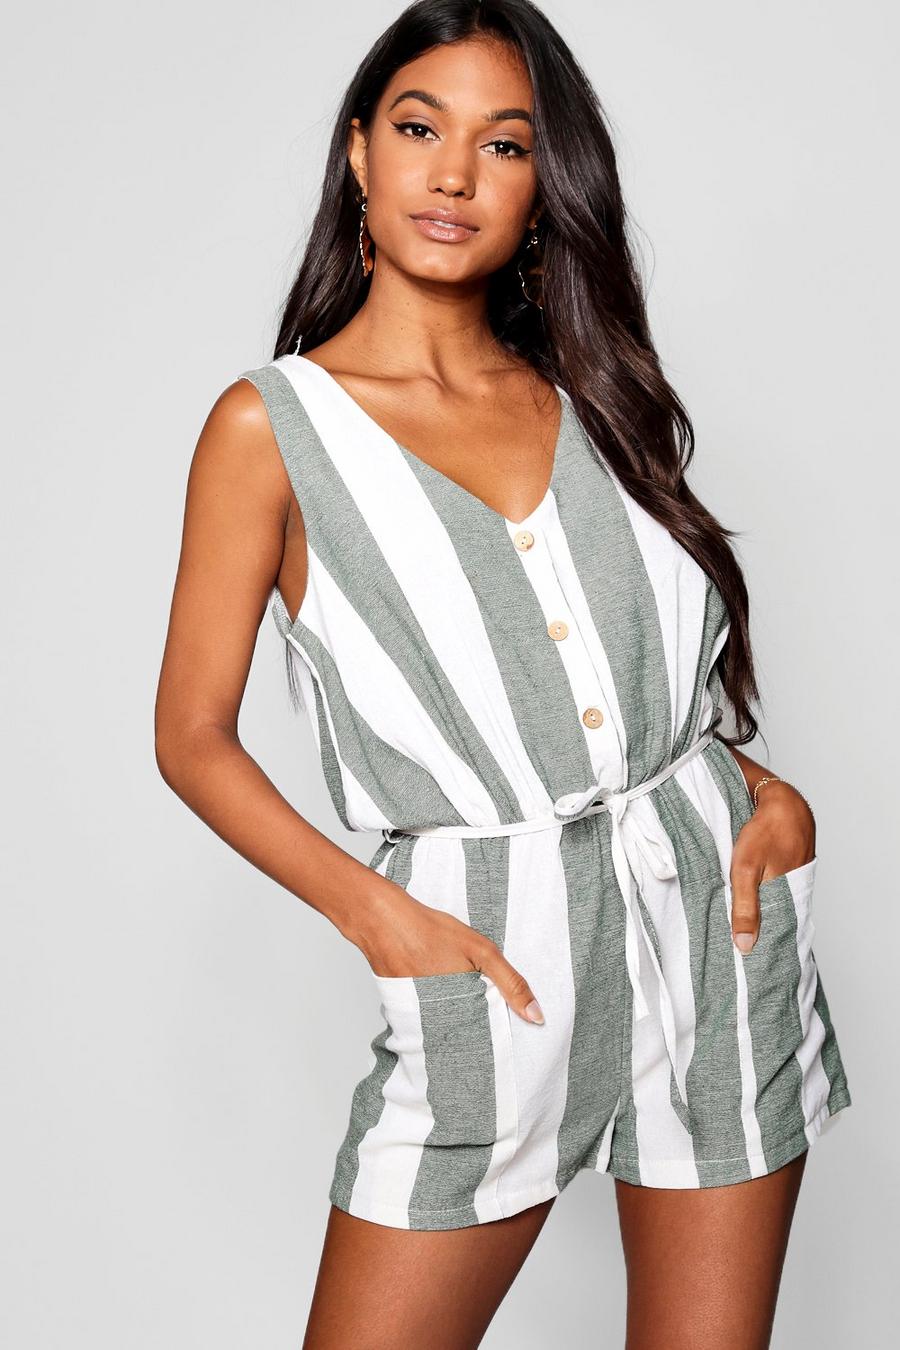 Boohoo Tall Stripe Button Up Romper in Stone Womens Clothing Jumpsuits and rompers Playsuits Natural 